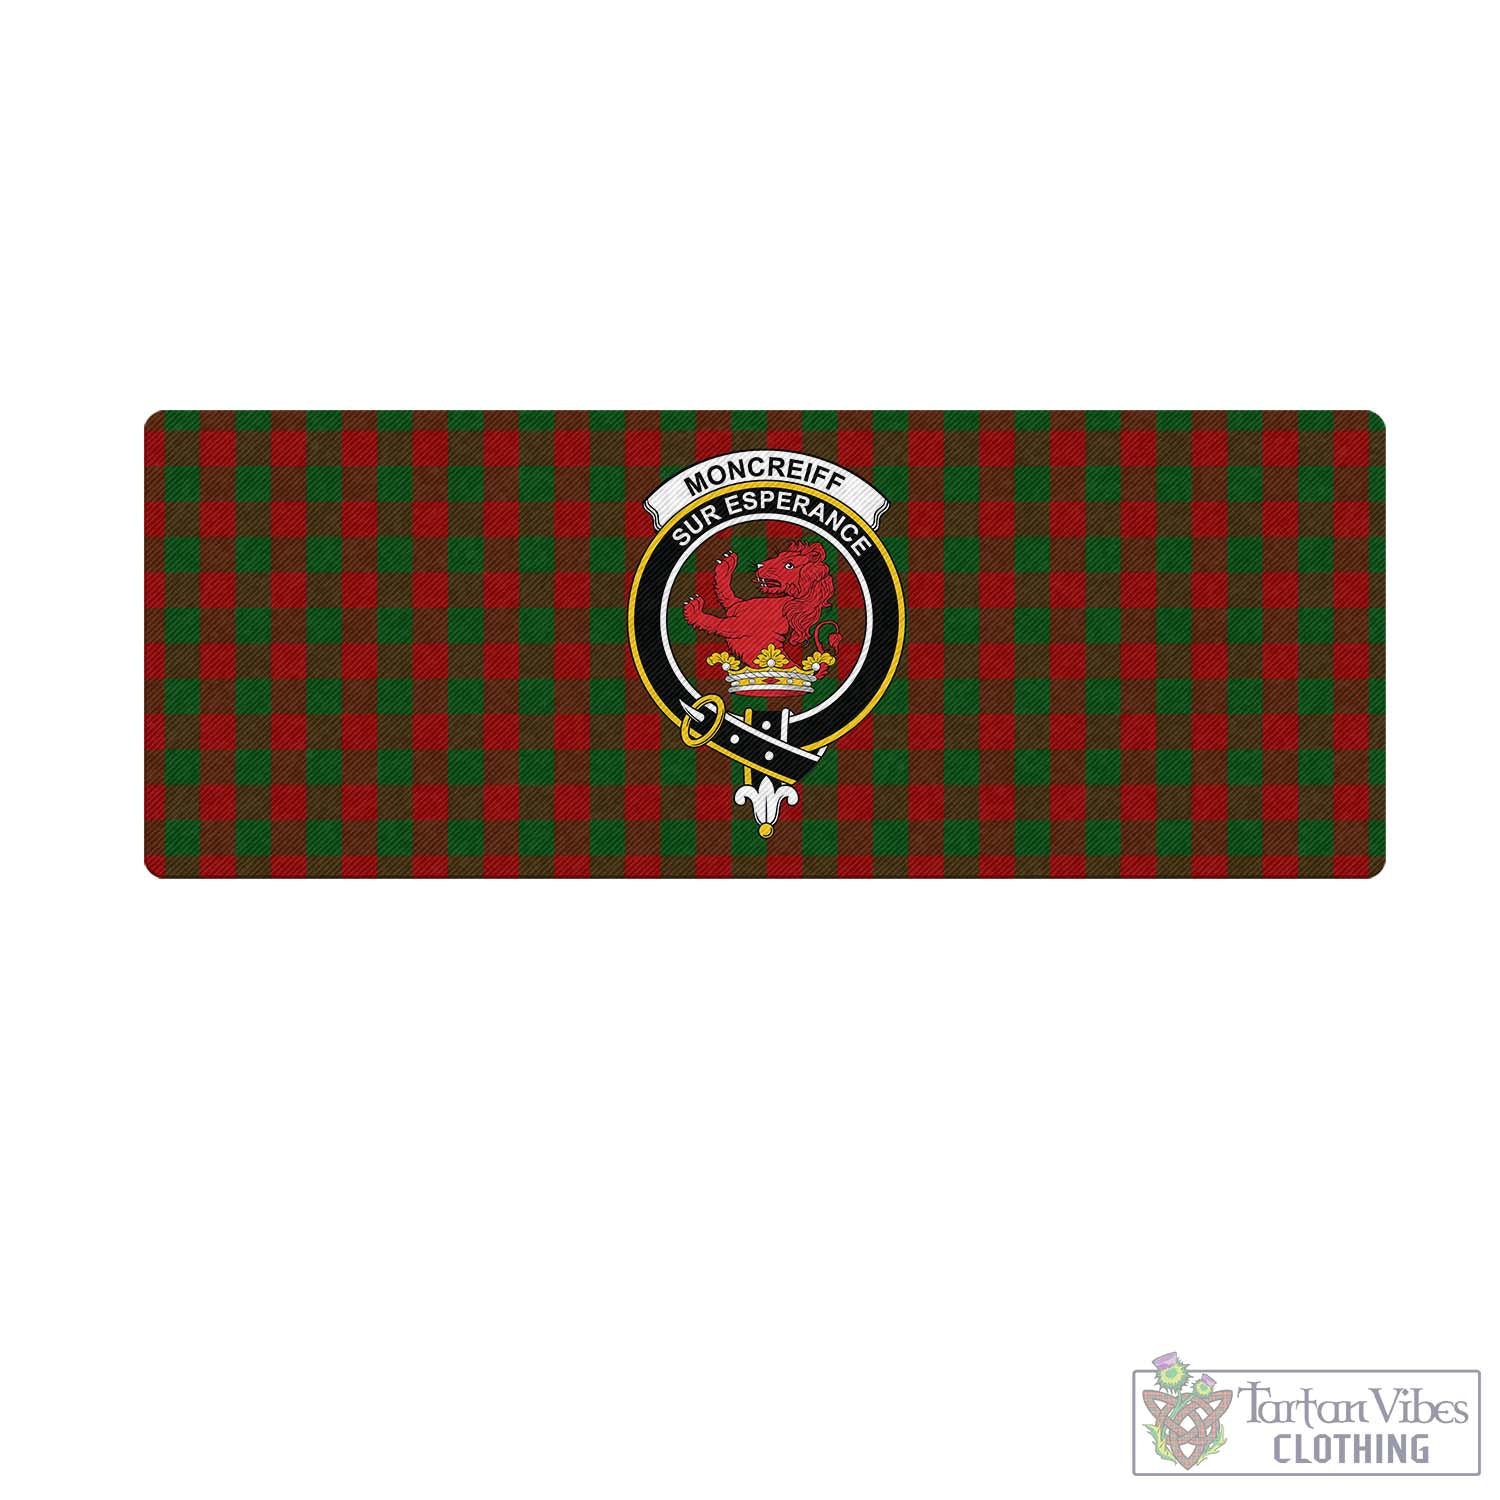 Tartan Vibes Clothing Moncrieff Tartan Mouse Pad with Family Crest